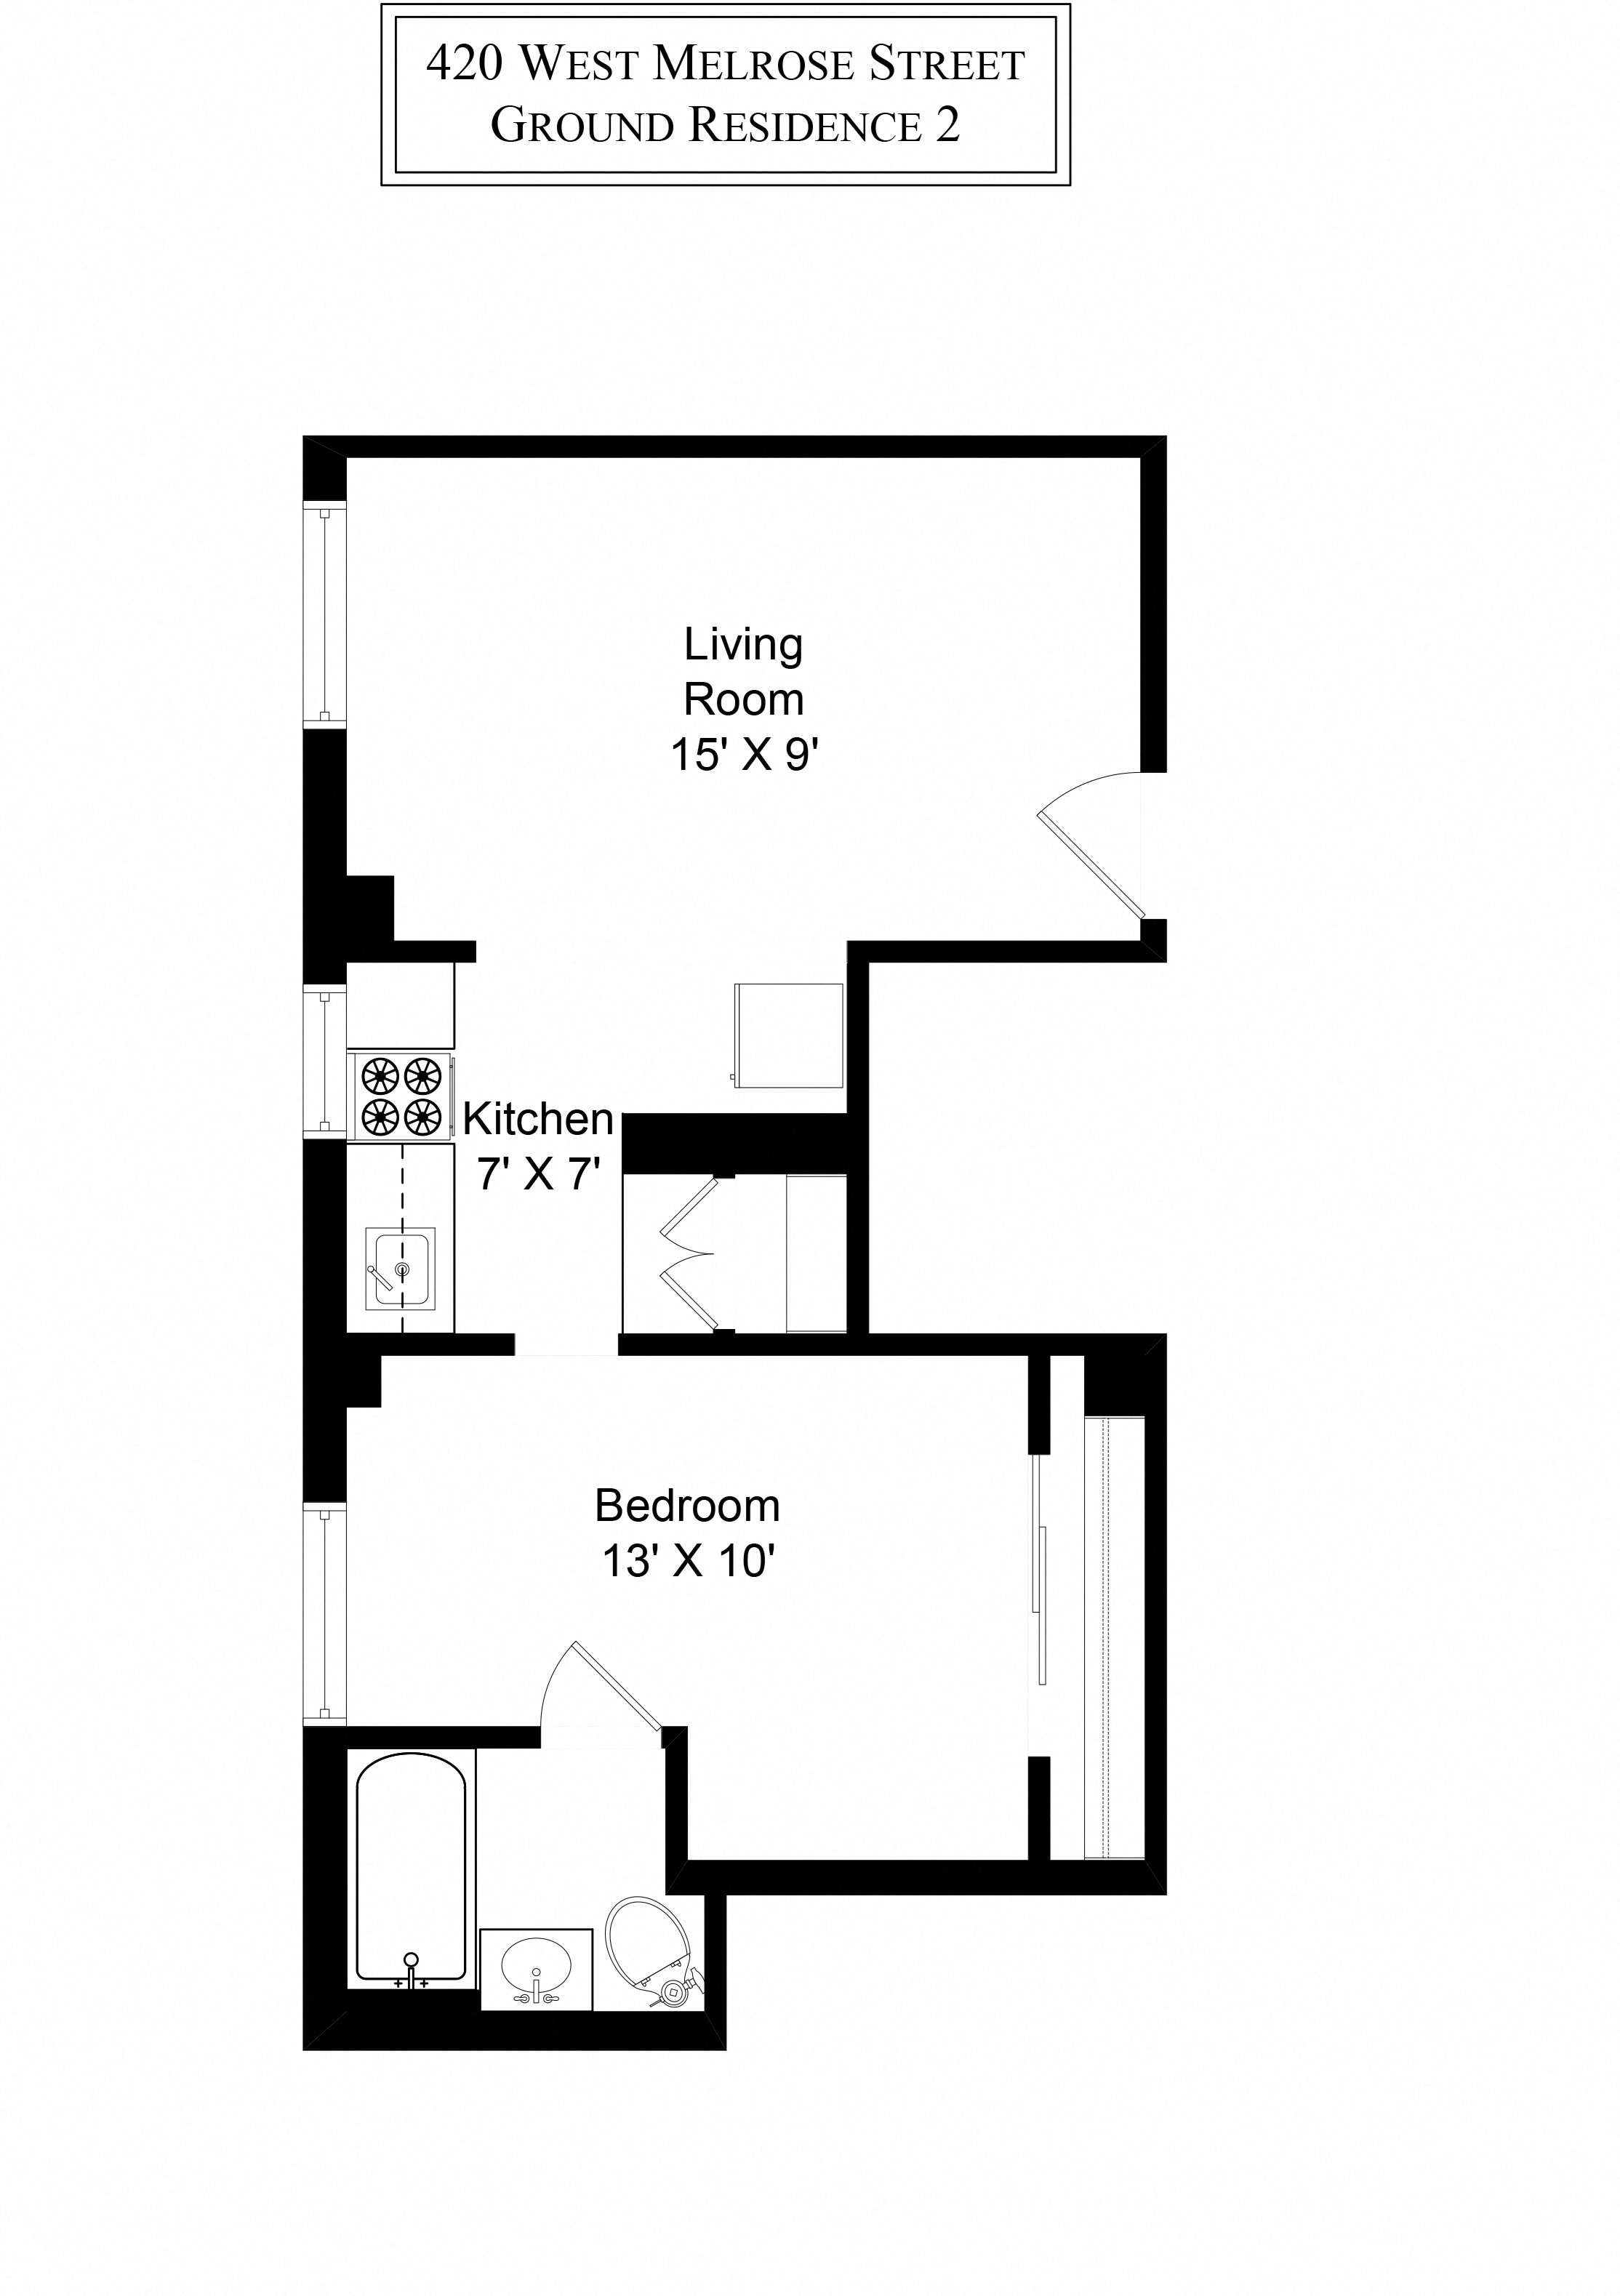 Floor Plans of 420 W. Melrose St. in Chicago, IL